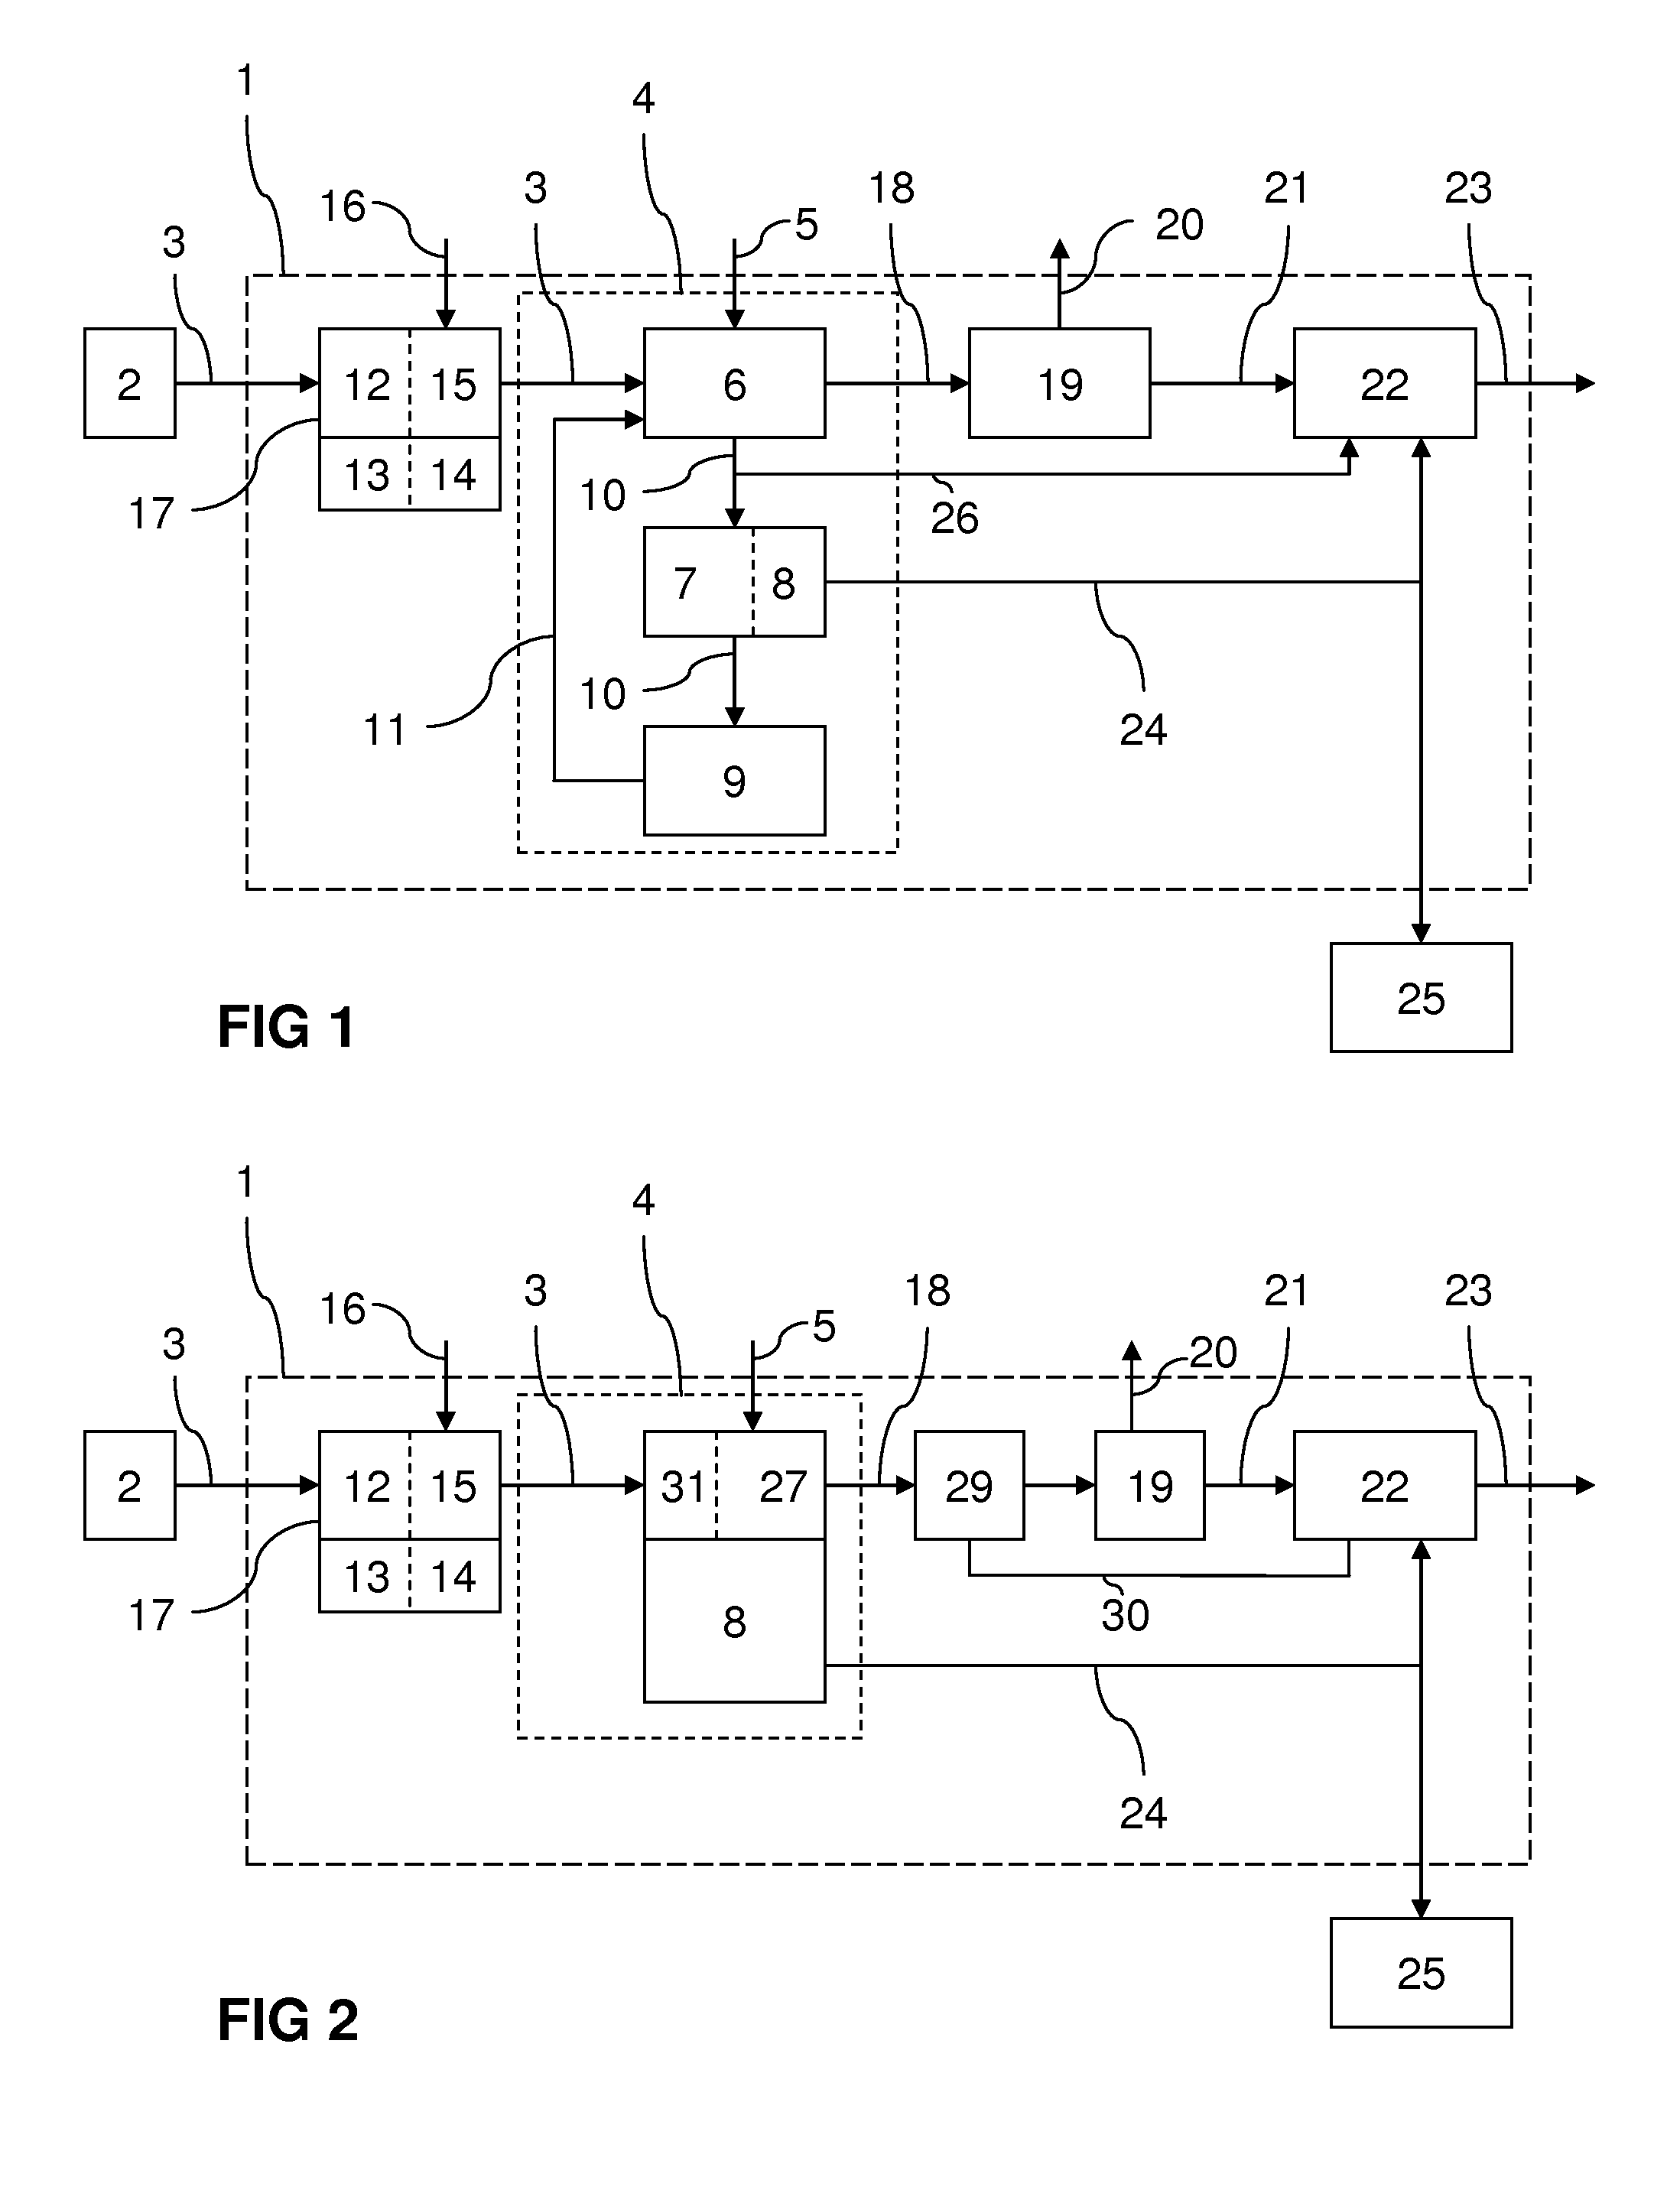 Method and device for generating electricity and gypsum from waste gases containing hydrogen sulfide